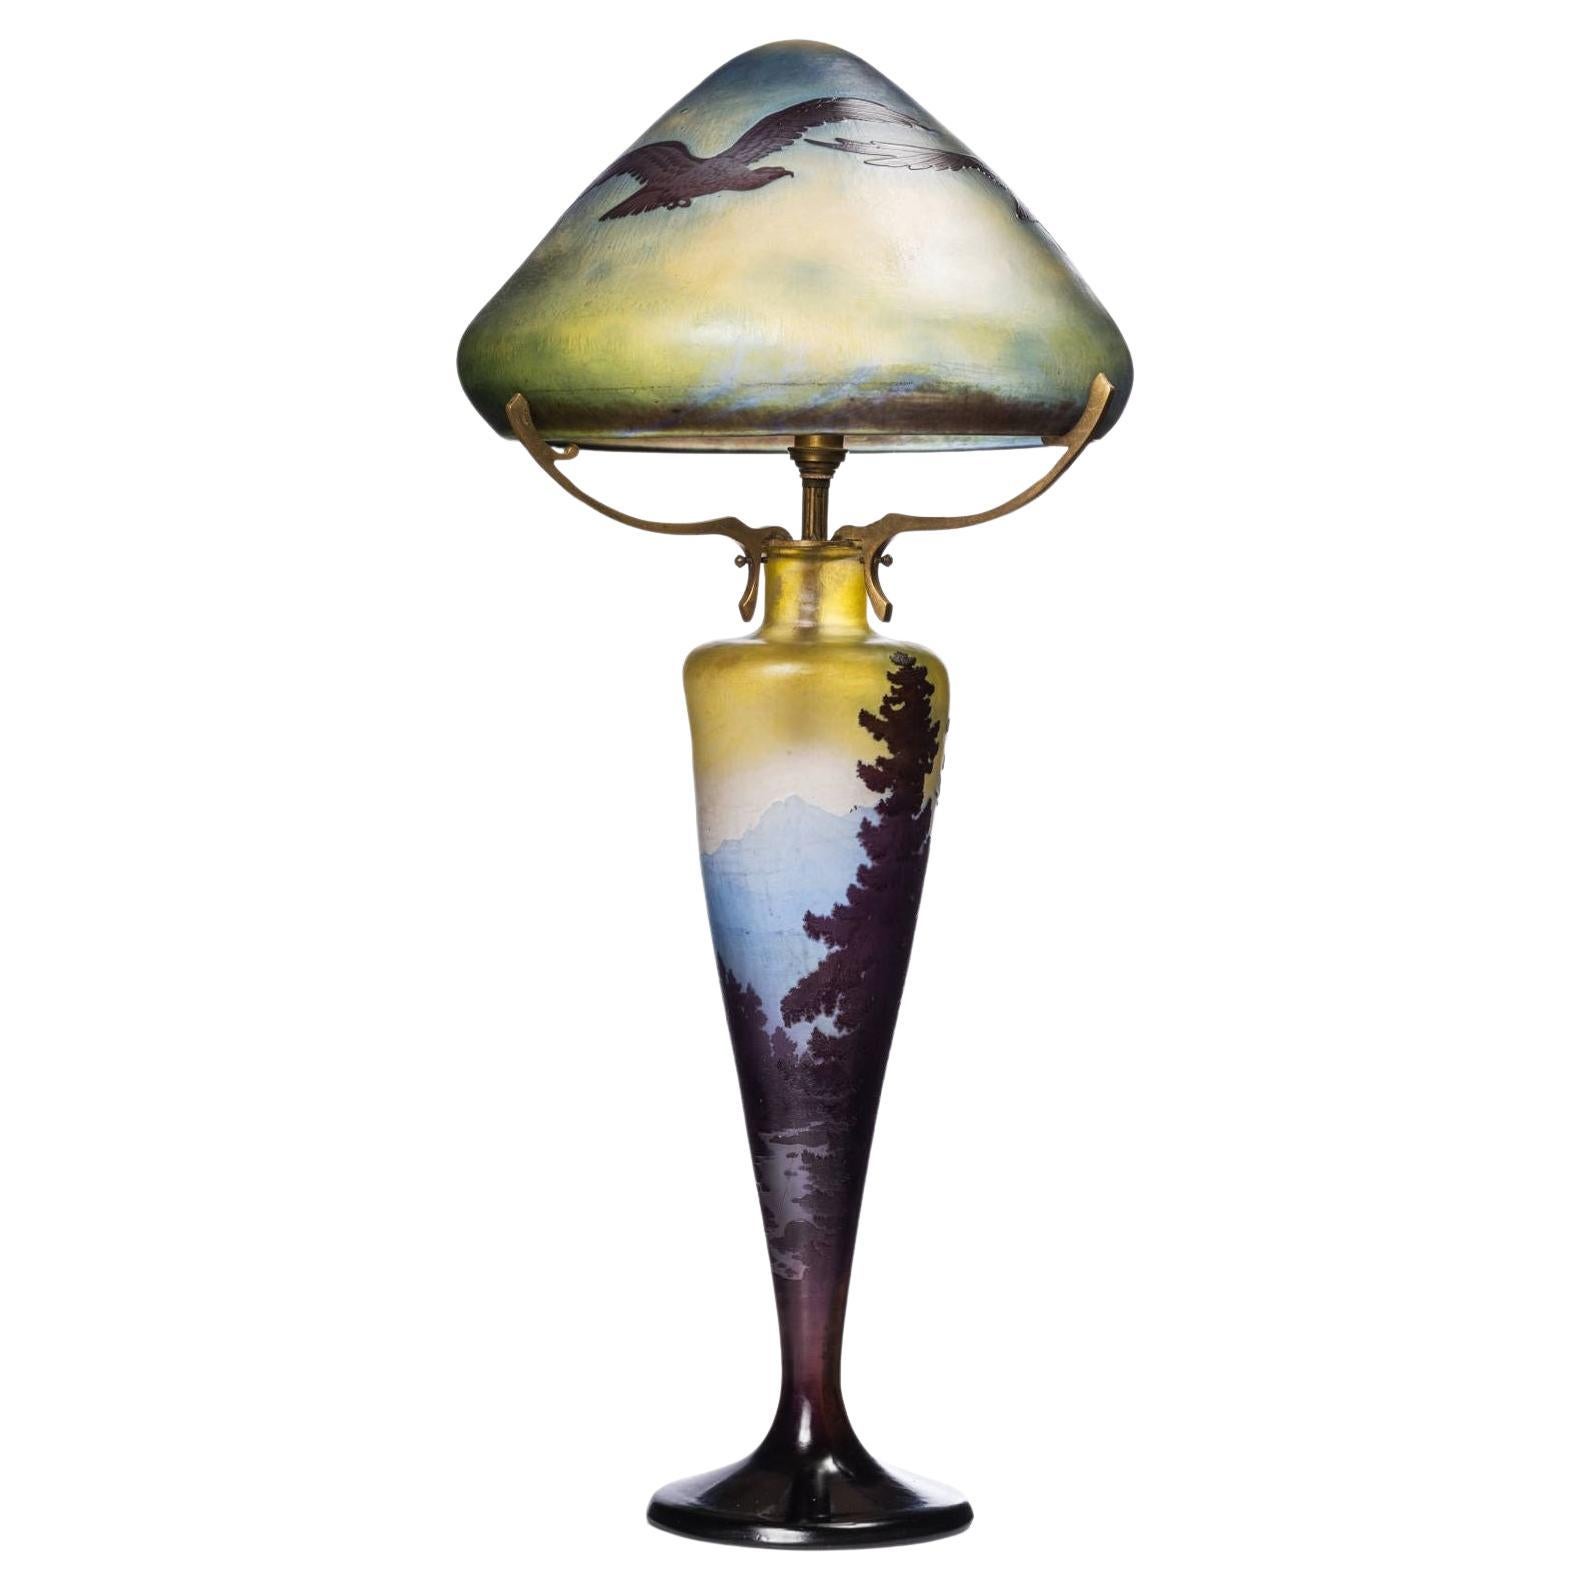 French Art Nouveau Table Lamp by Emile Galle ''Vosges Paysage'' Cameo Glass 1900 For Sale